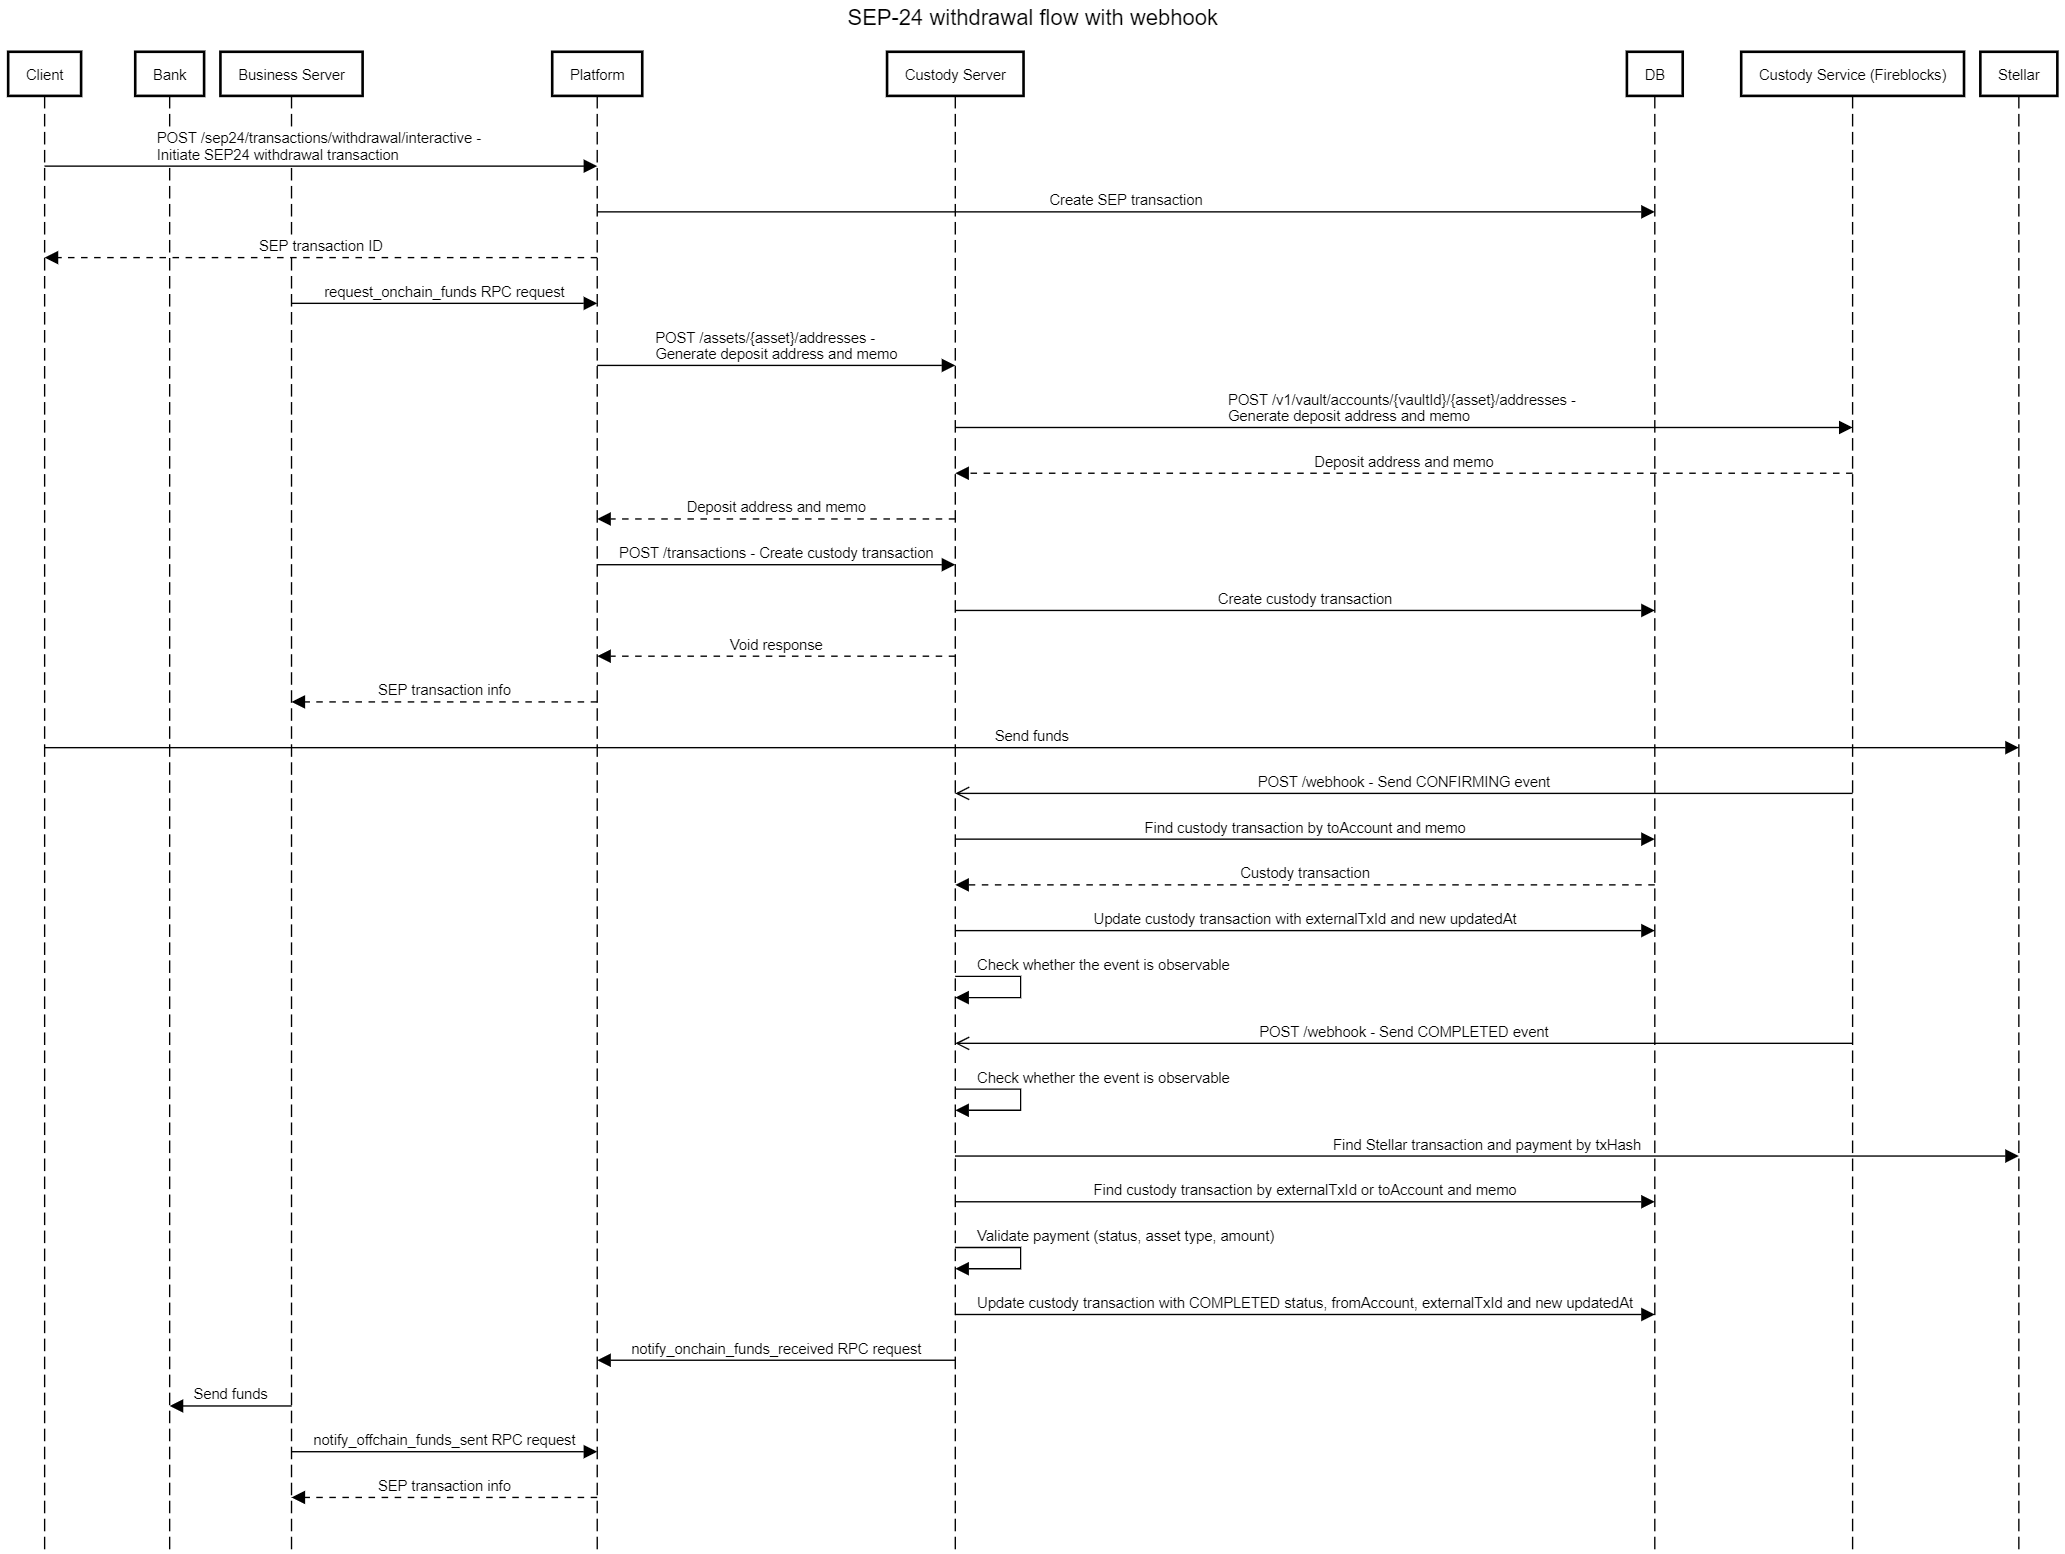 sequence_diagram_sep24_withdrawal_webhook